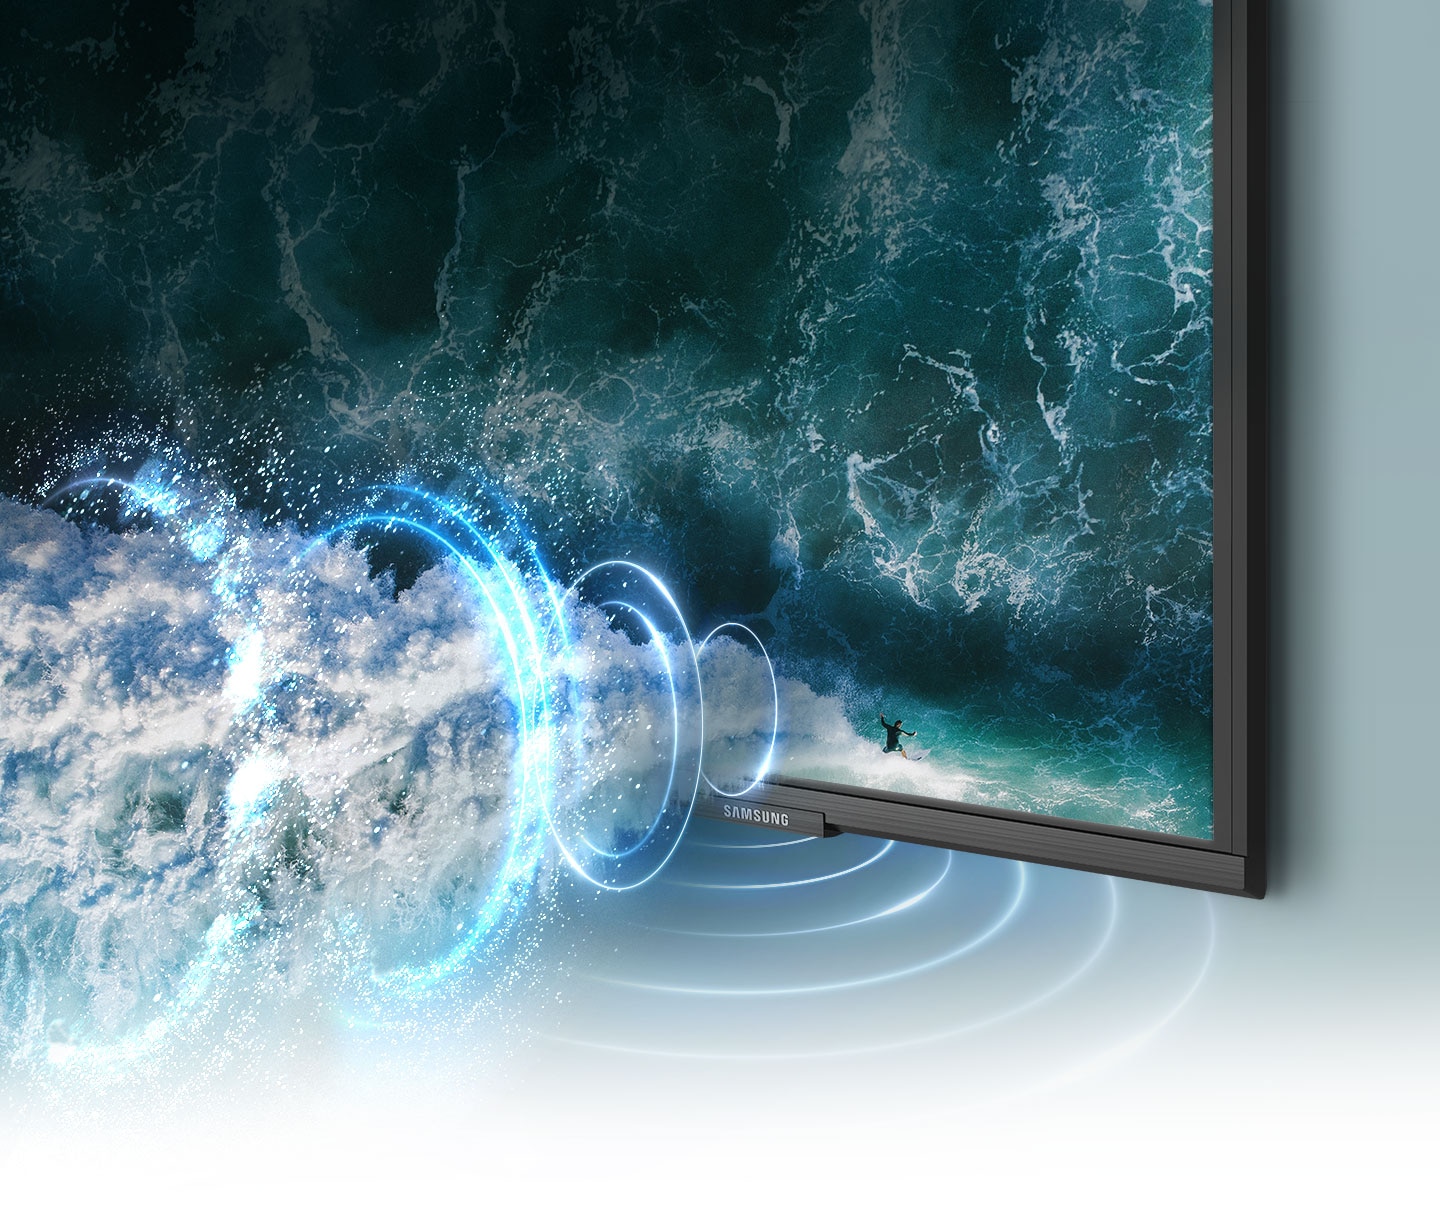 Simulated sound wave graphics demonstrate sound object tracking technology as it follows a surfer on the TV screen.